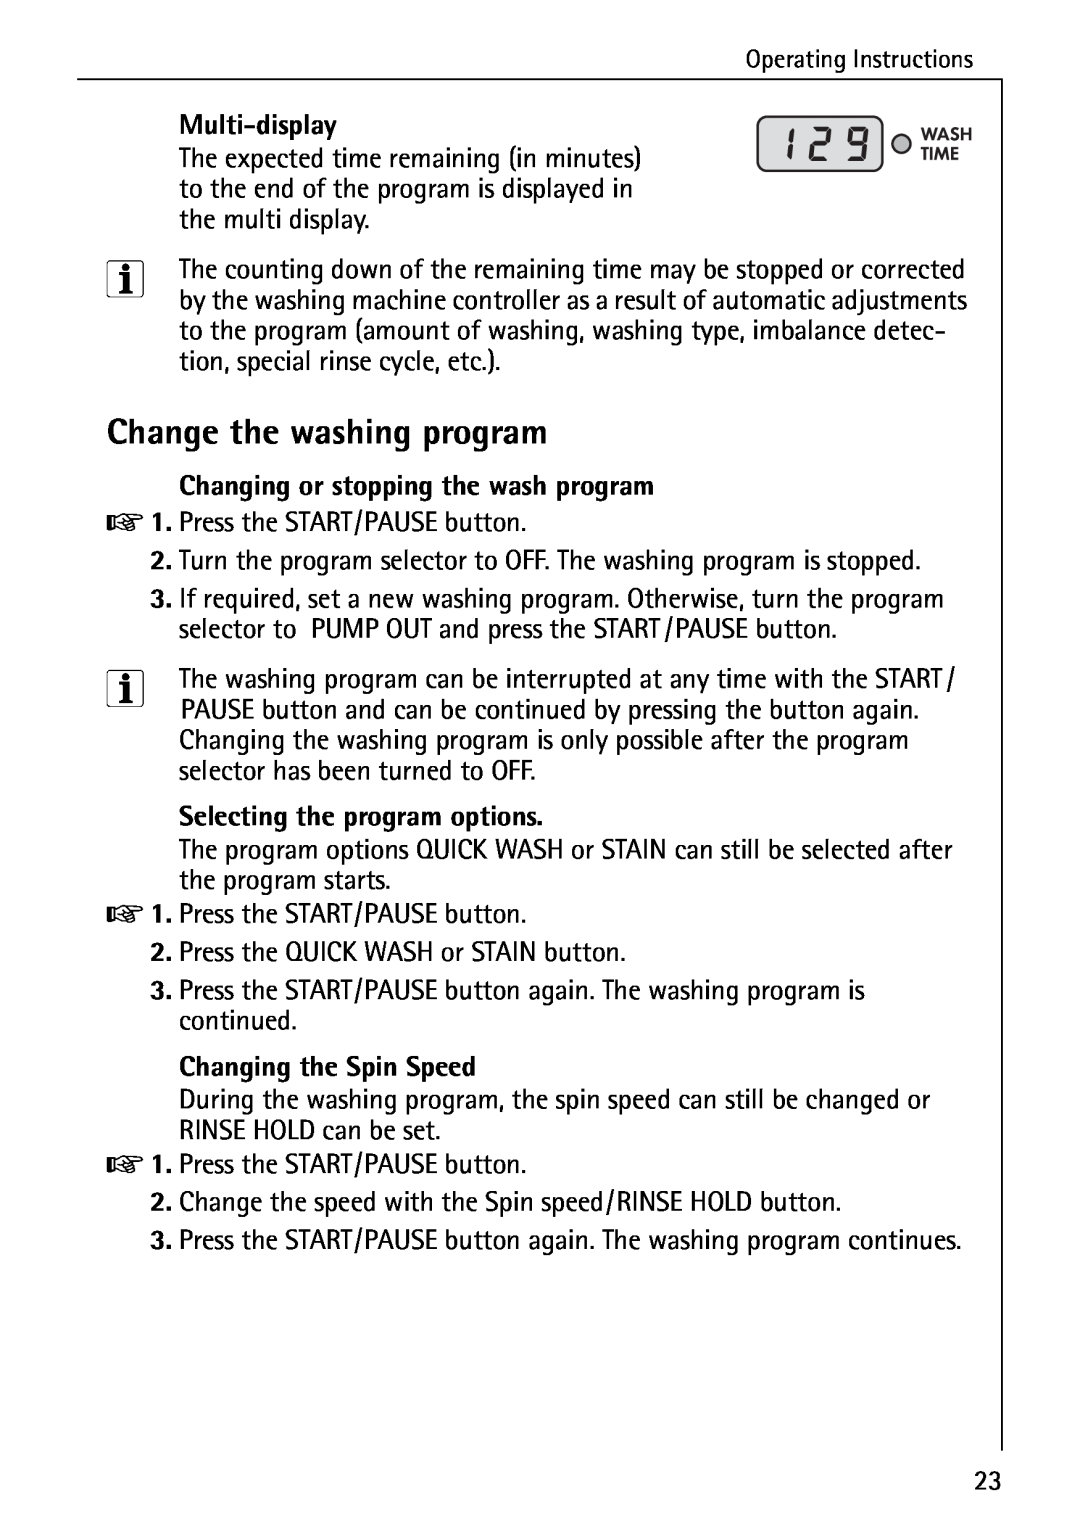 Electrolux 76639 Change the washing program, Multi-display, Changing or stopping the wash program, Changing the Spin Speed 